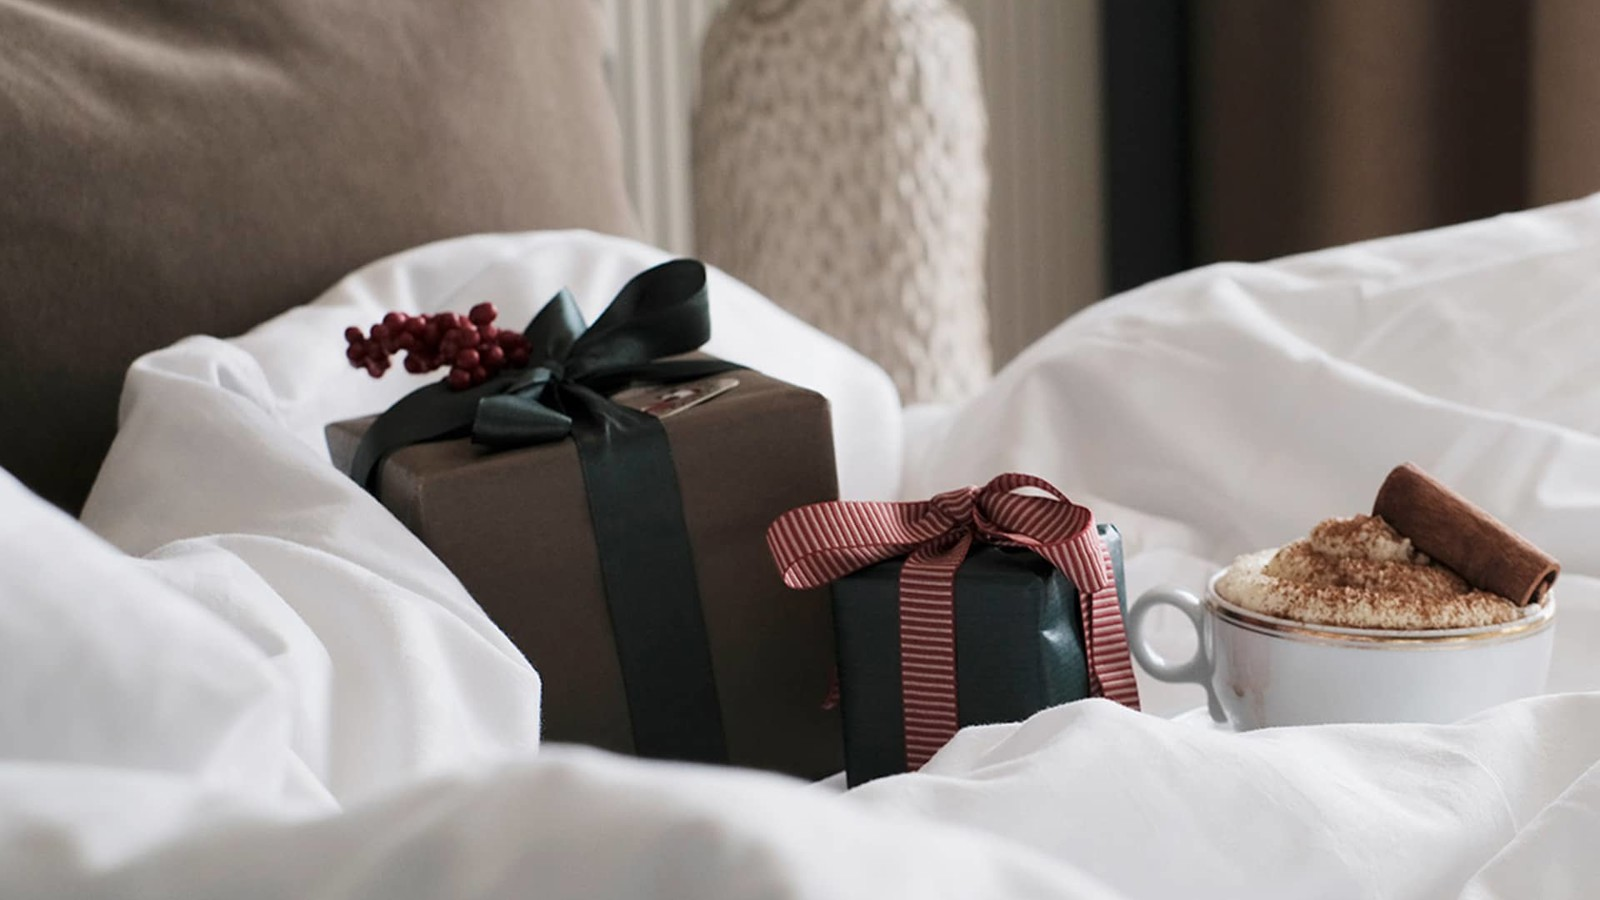 Christmas presents and a cup of hot chocolate on a fluffy hotel bed